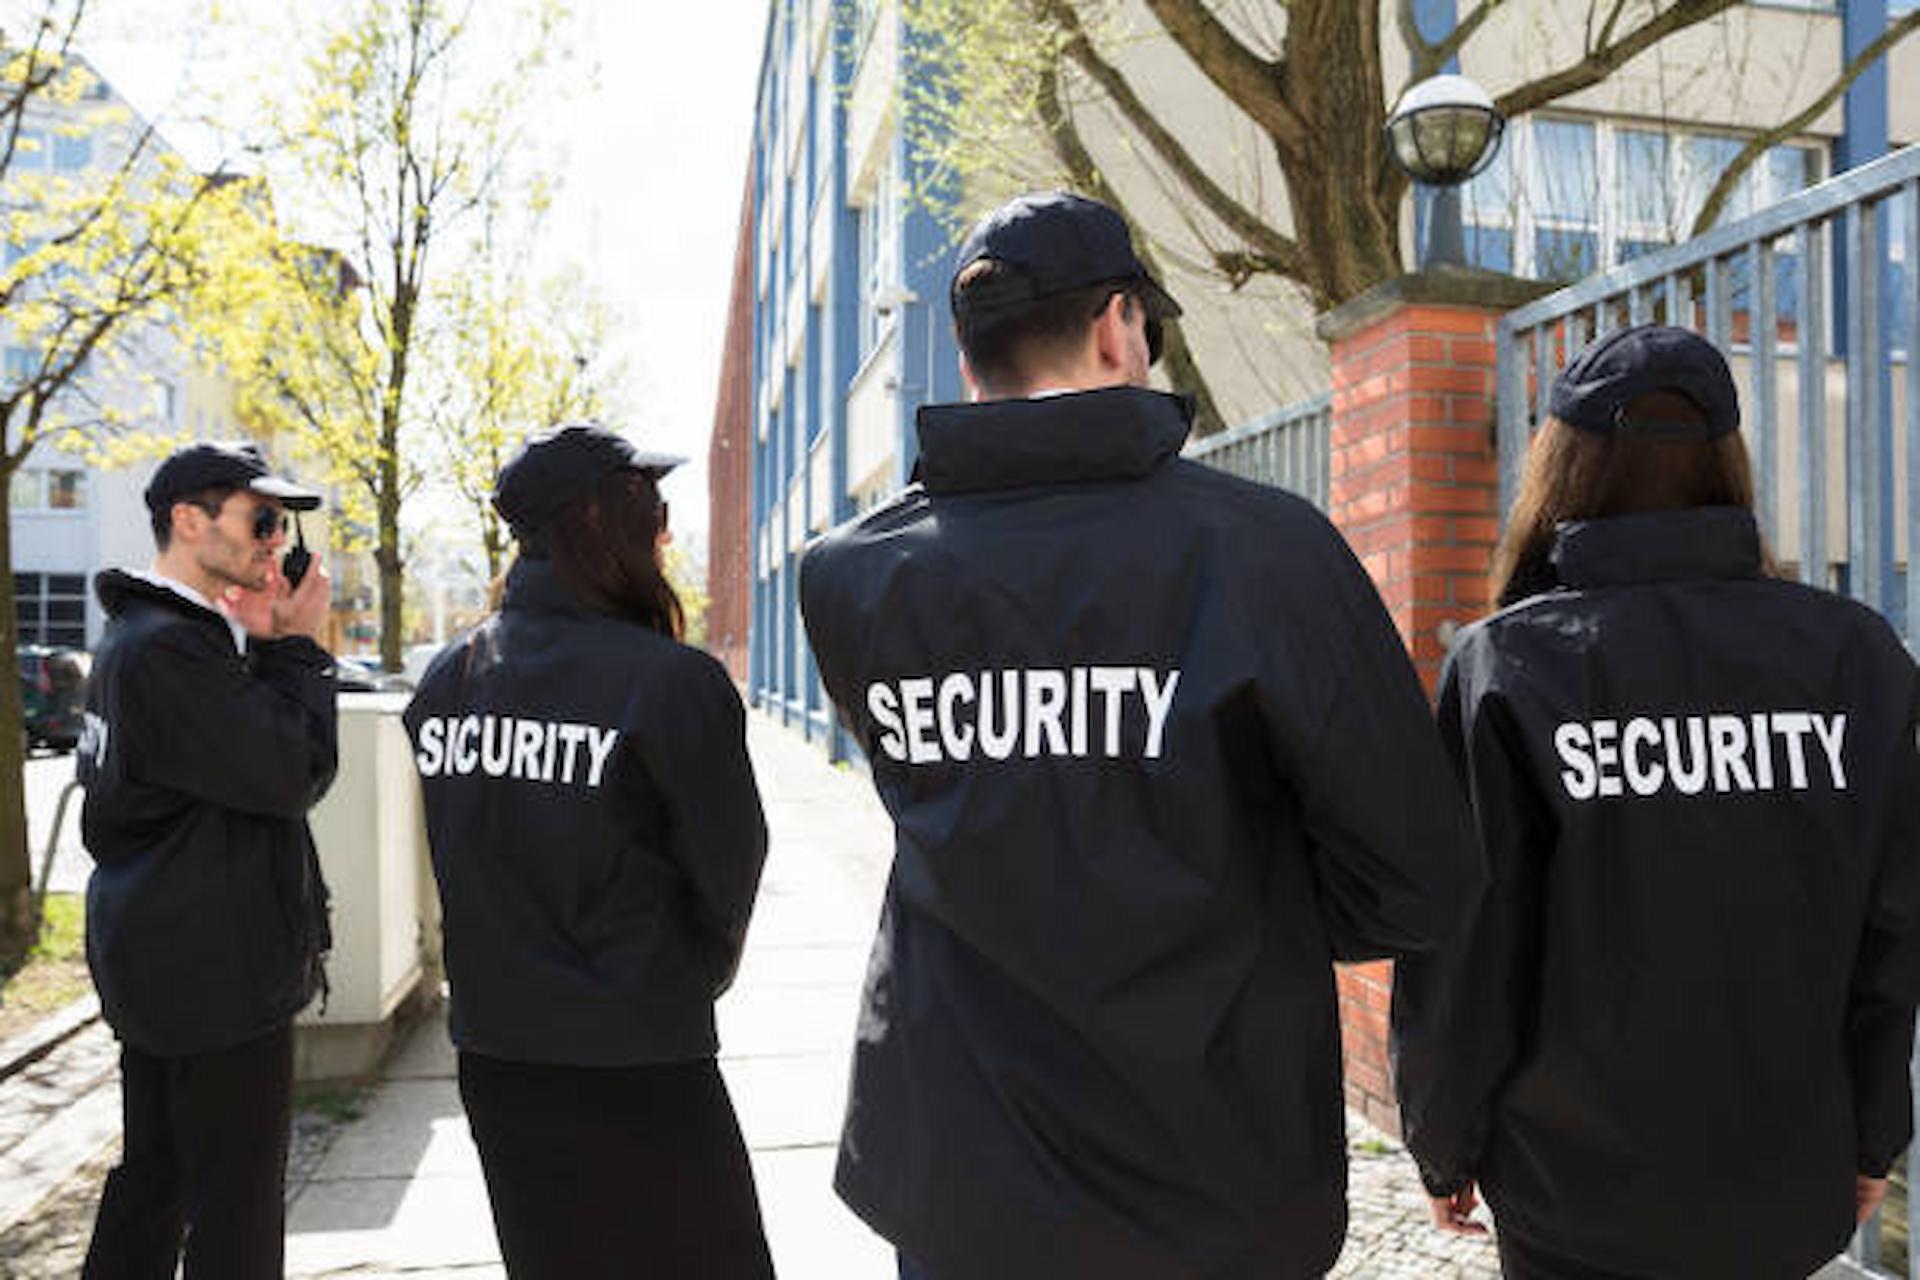 Are Security Services Expensive?